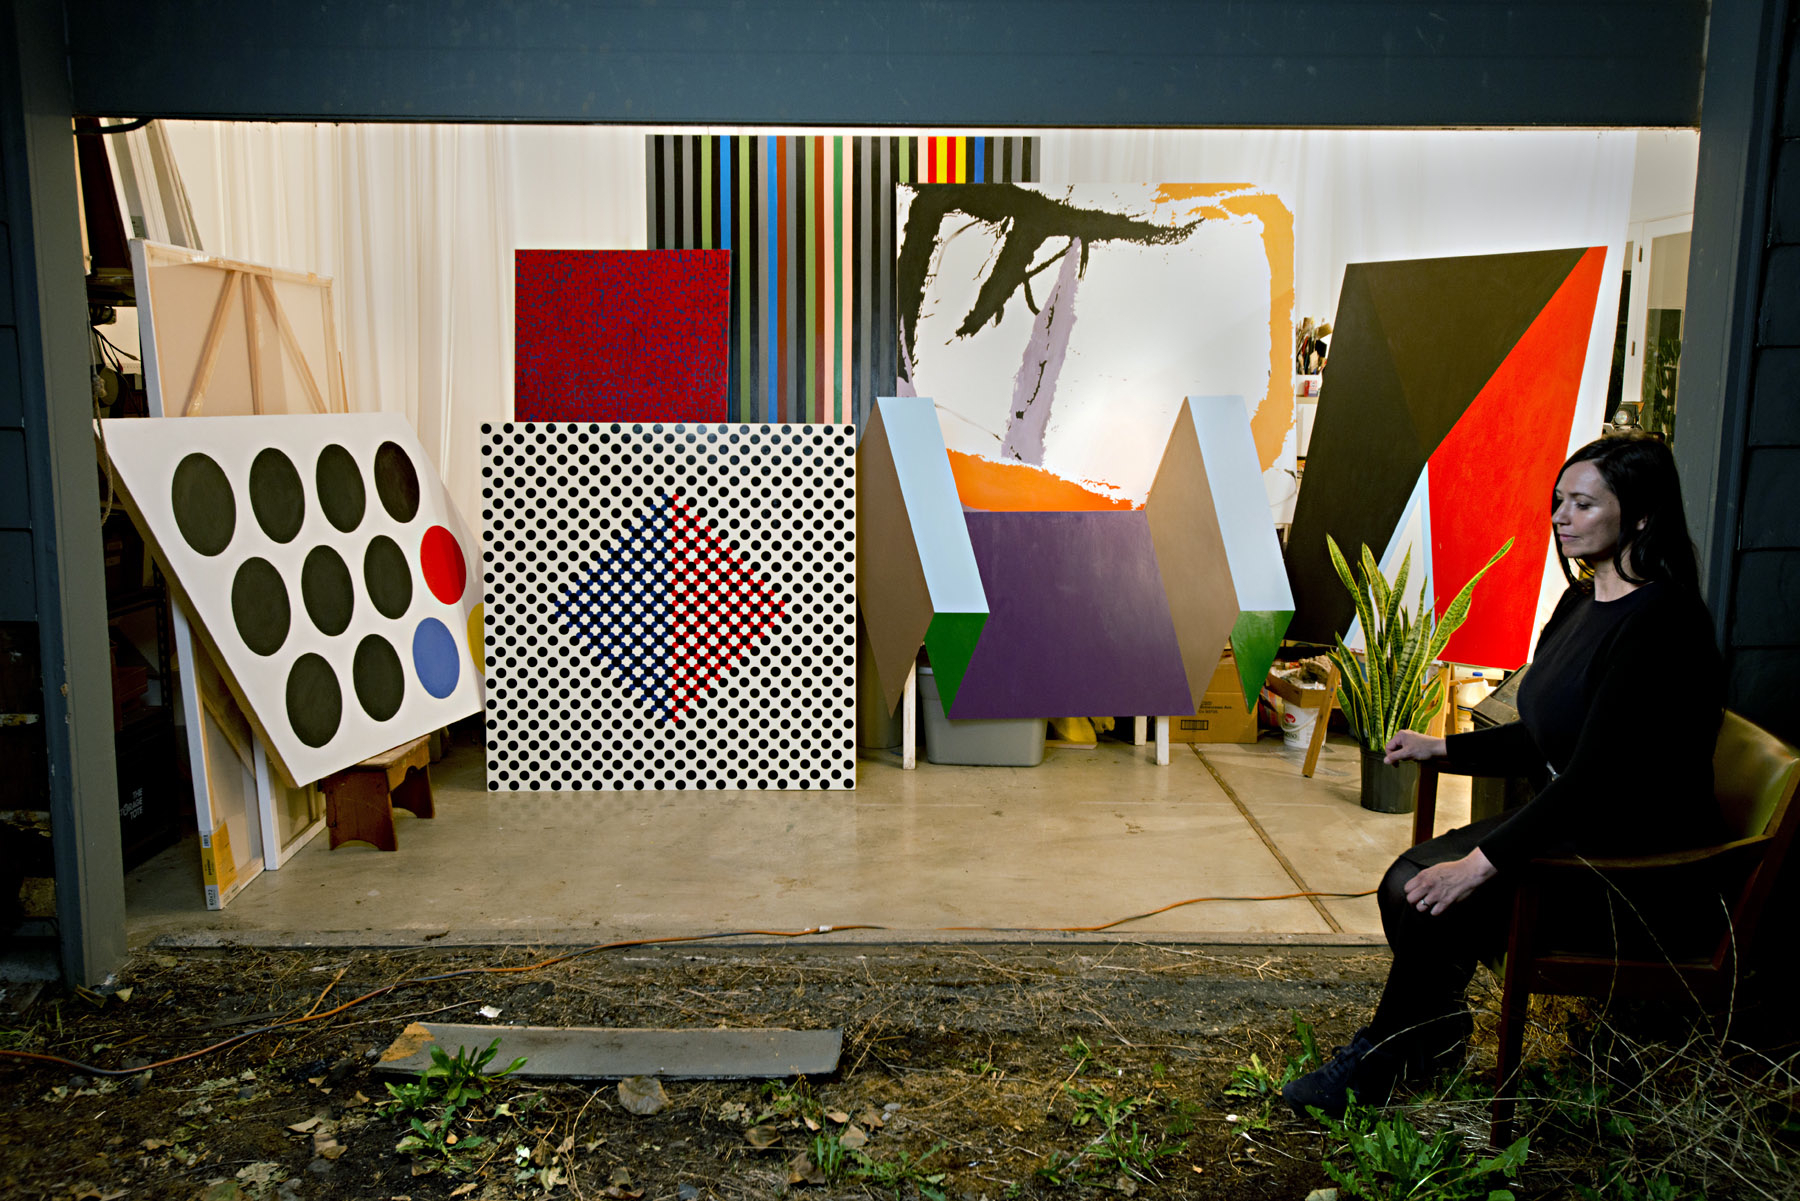 Artist Johanna Barron with selections from her recreation of the Melzac Collection held by the CIA (2015) (image by James Rexroad)